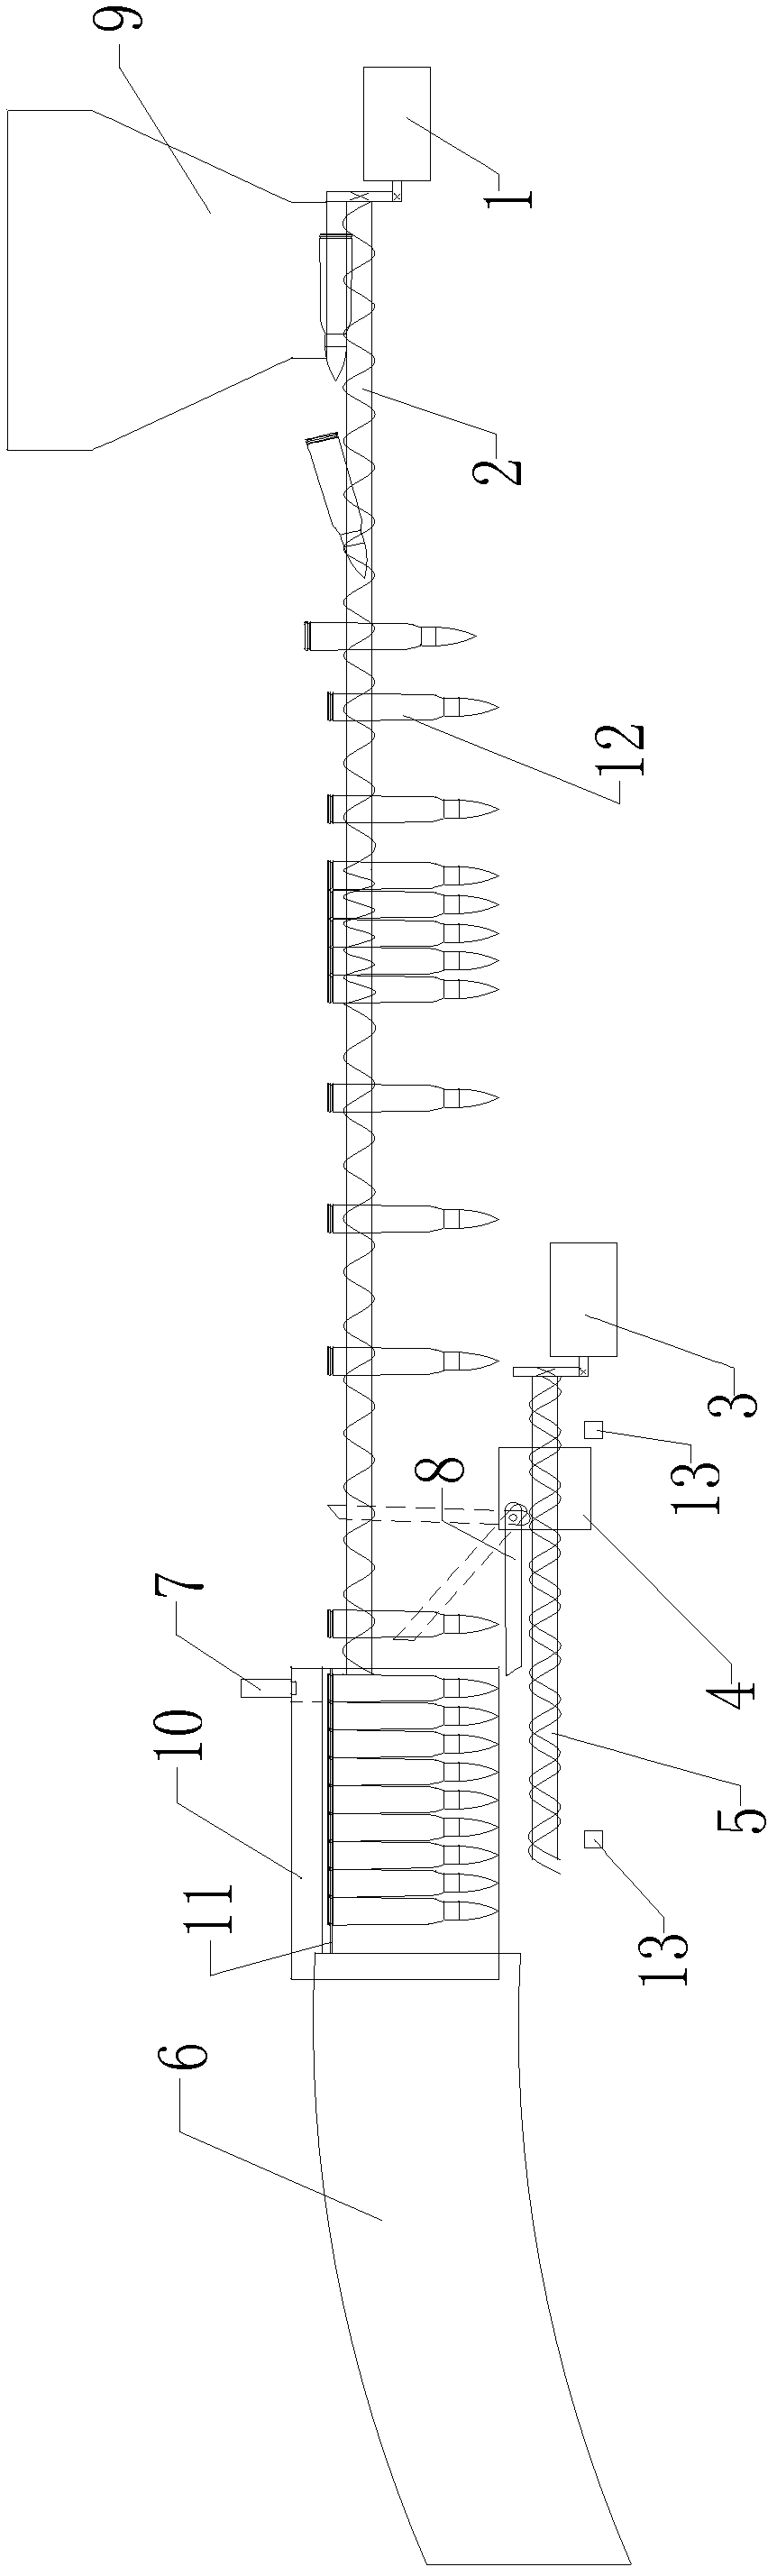 Automatic bullet sorting and assembling device